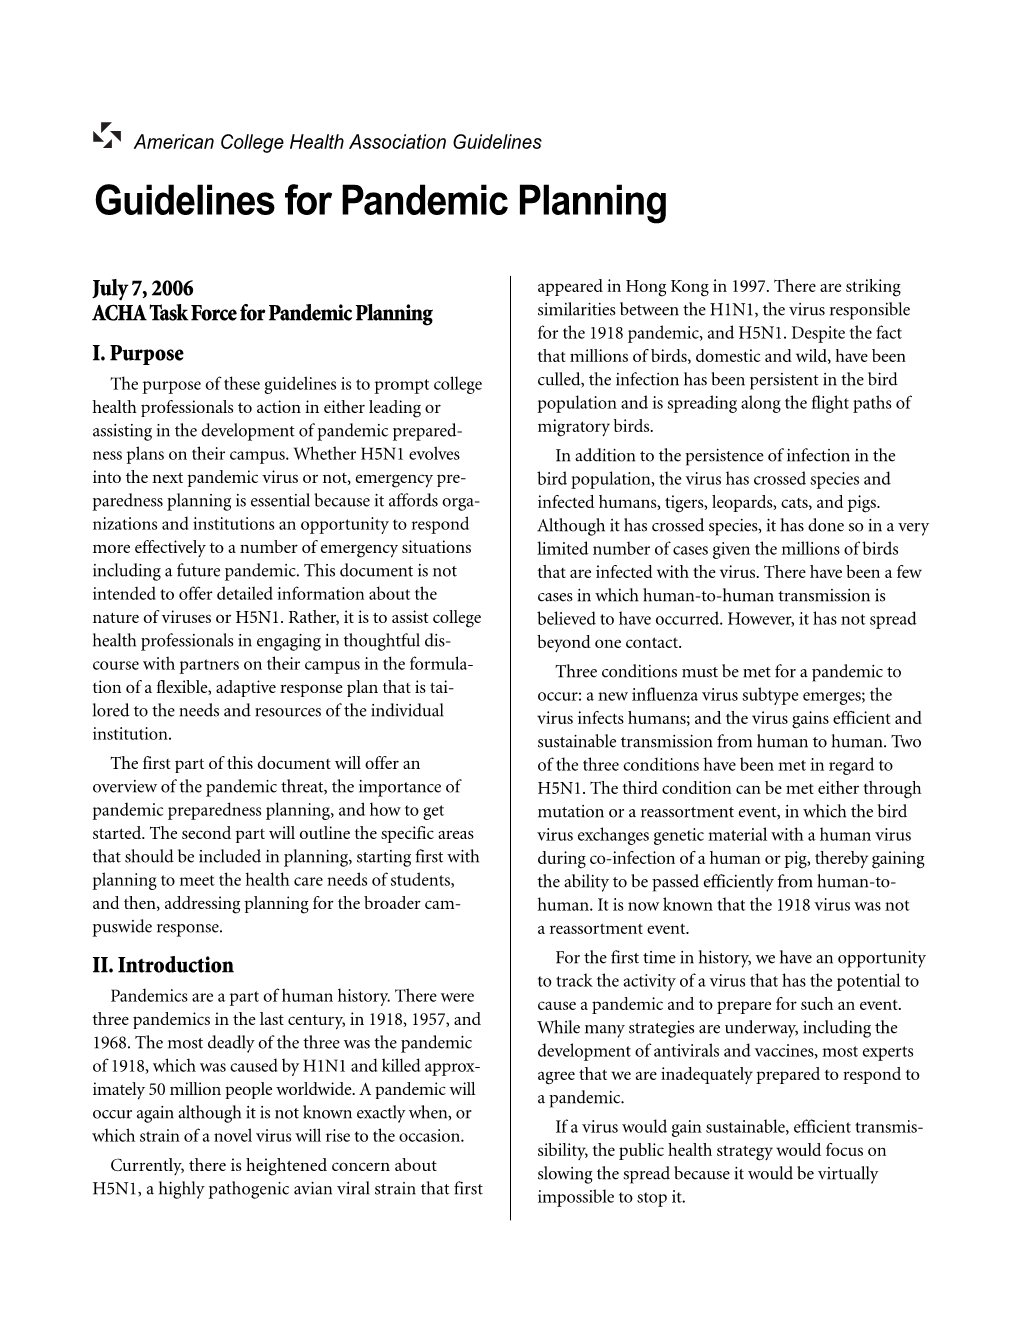 Pandemic Guidelines 06.Qxp